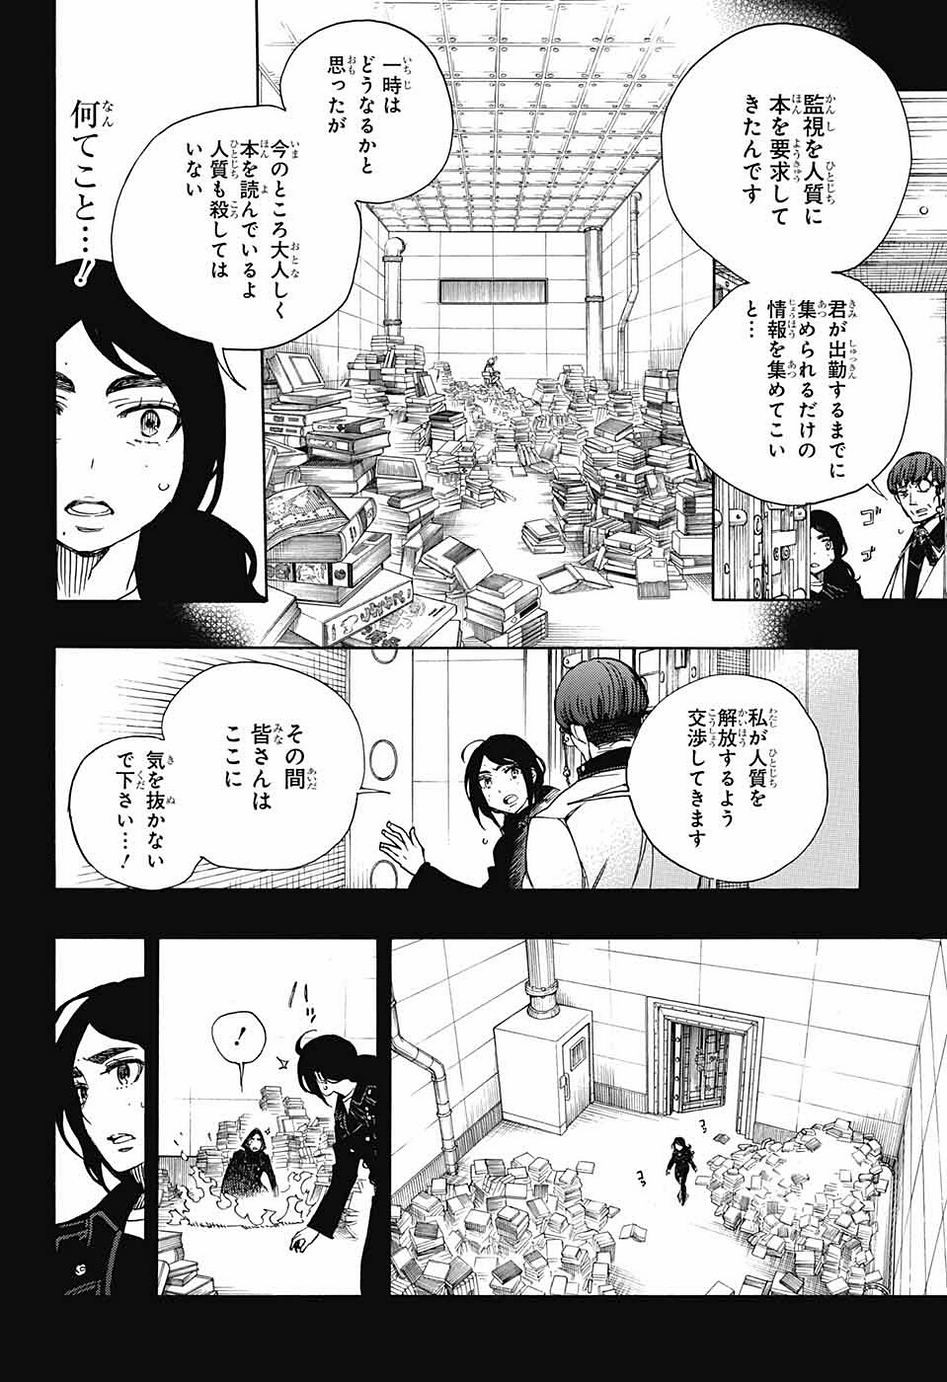 Ao no Exorcist - Chapter 105 - Page 33